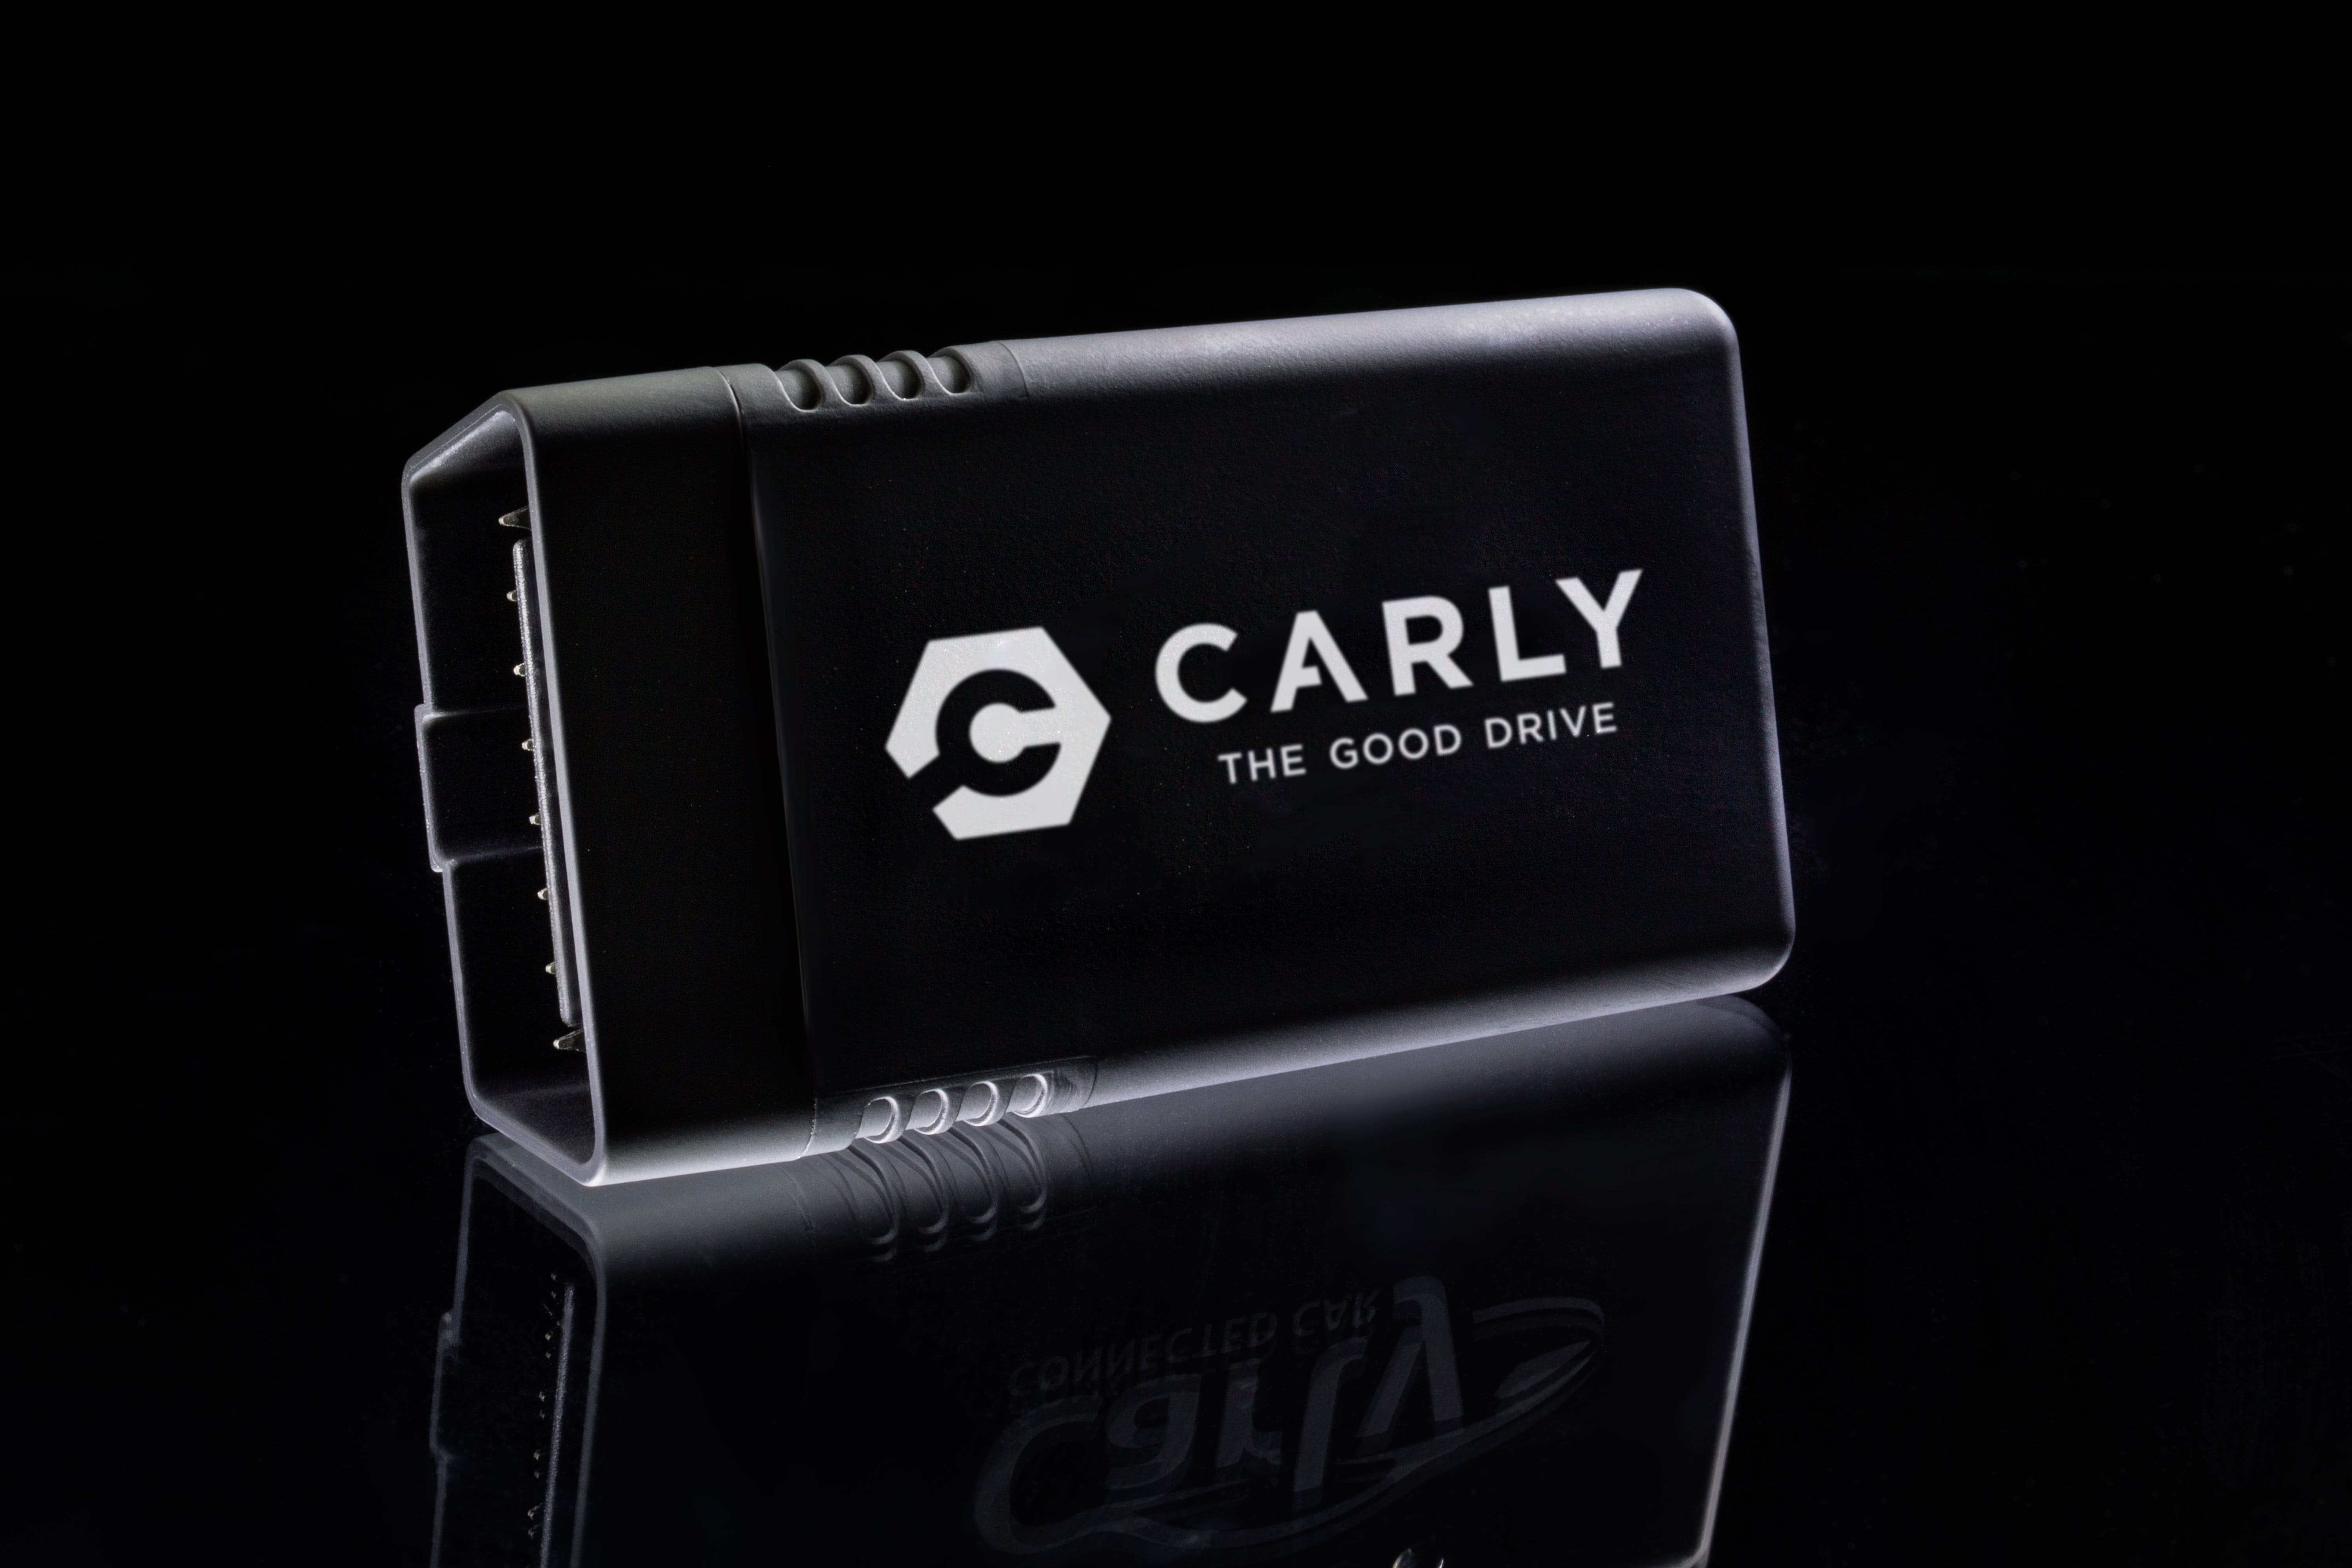 CarTech Company, Carly, Launches Universal Onboard Diagnostic